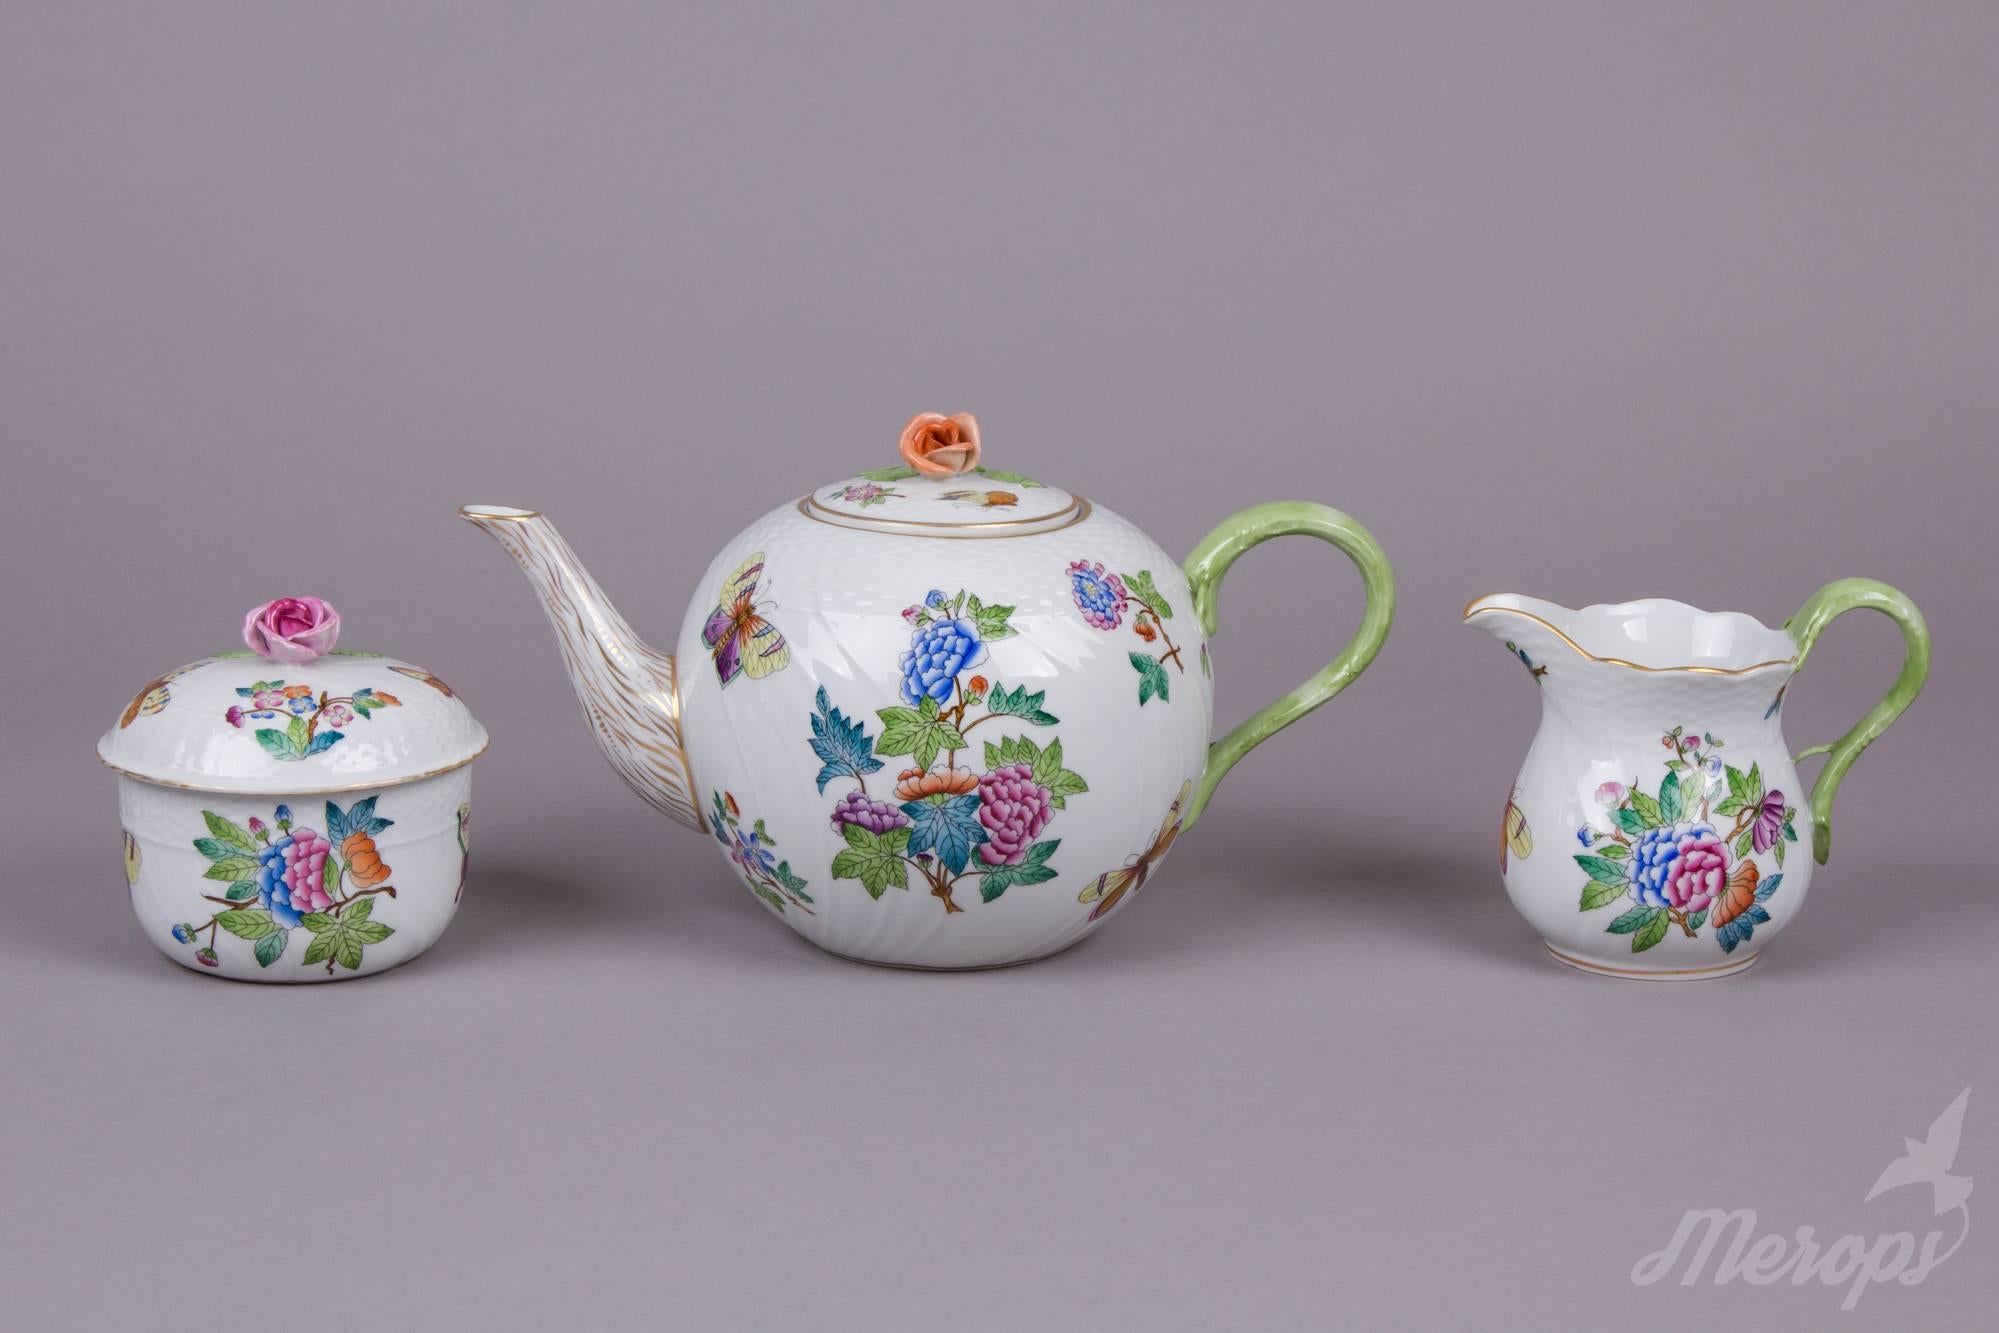 Hungarian Herend Queen Victoria Tea and Dessert Set for Ten Persons, from 1942